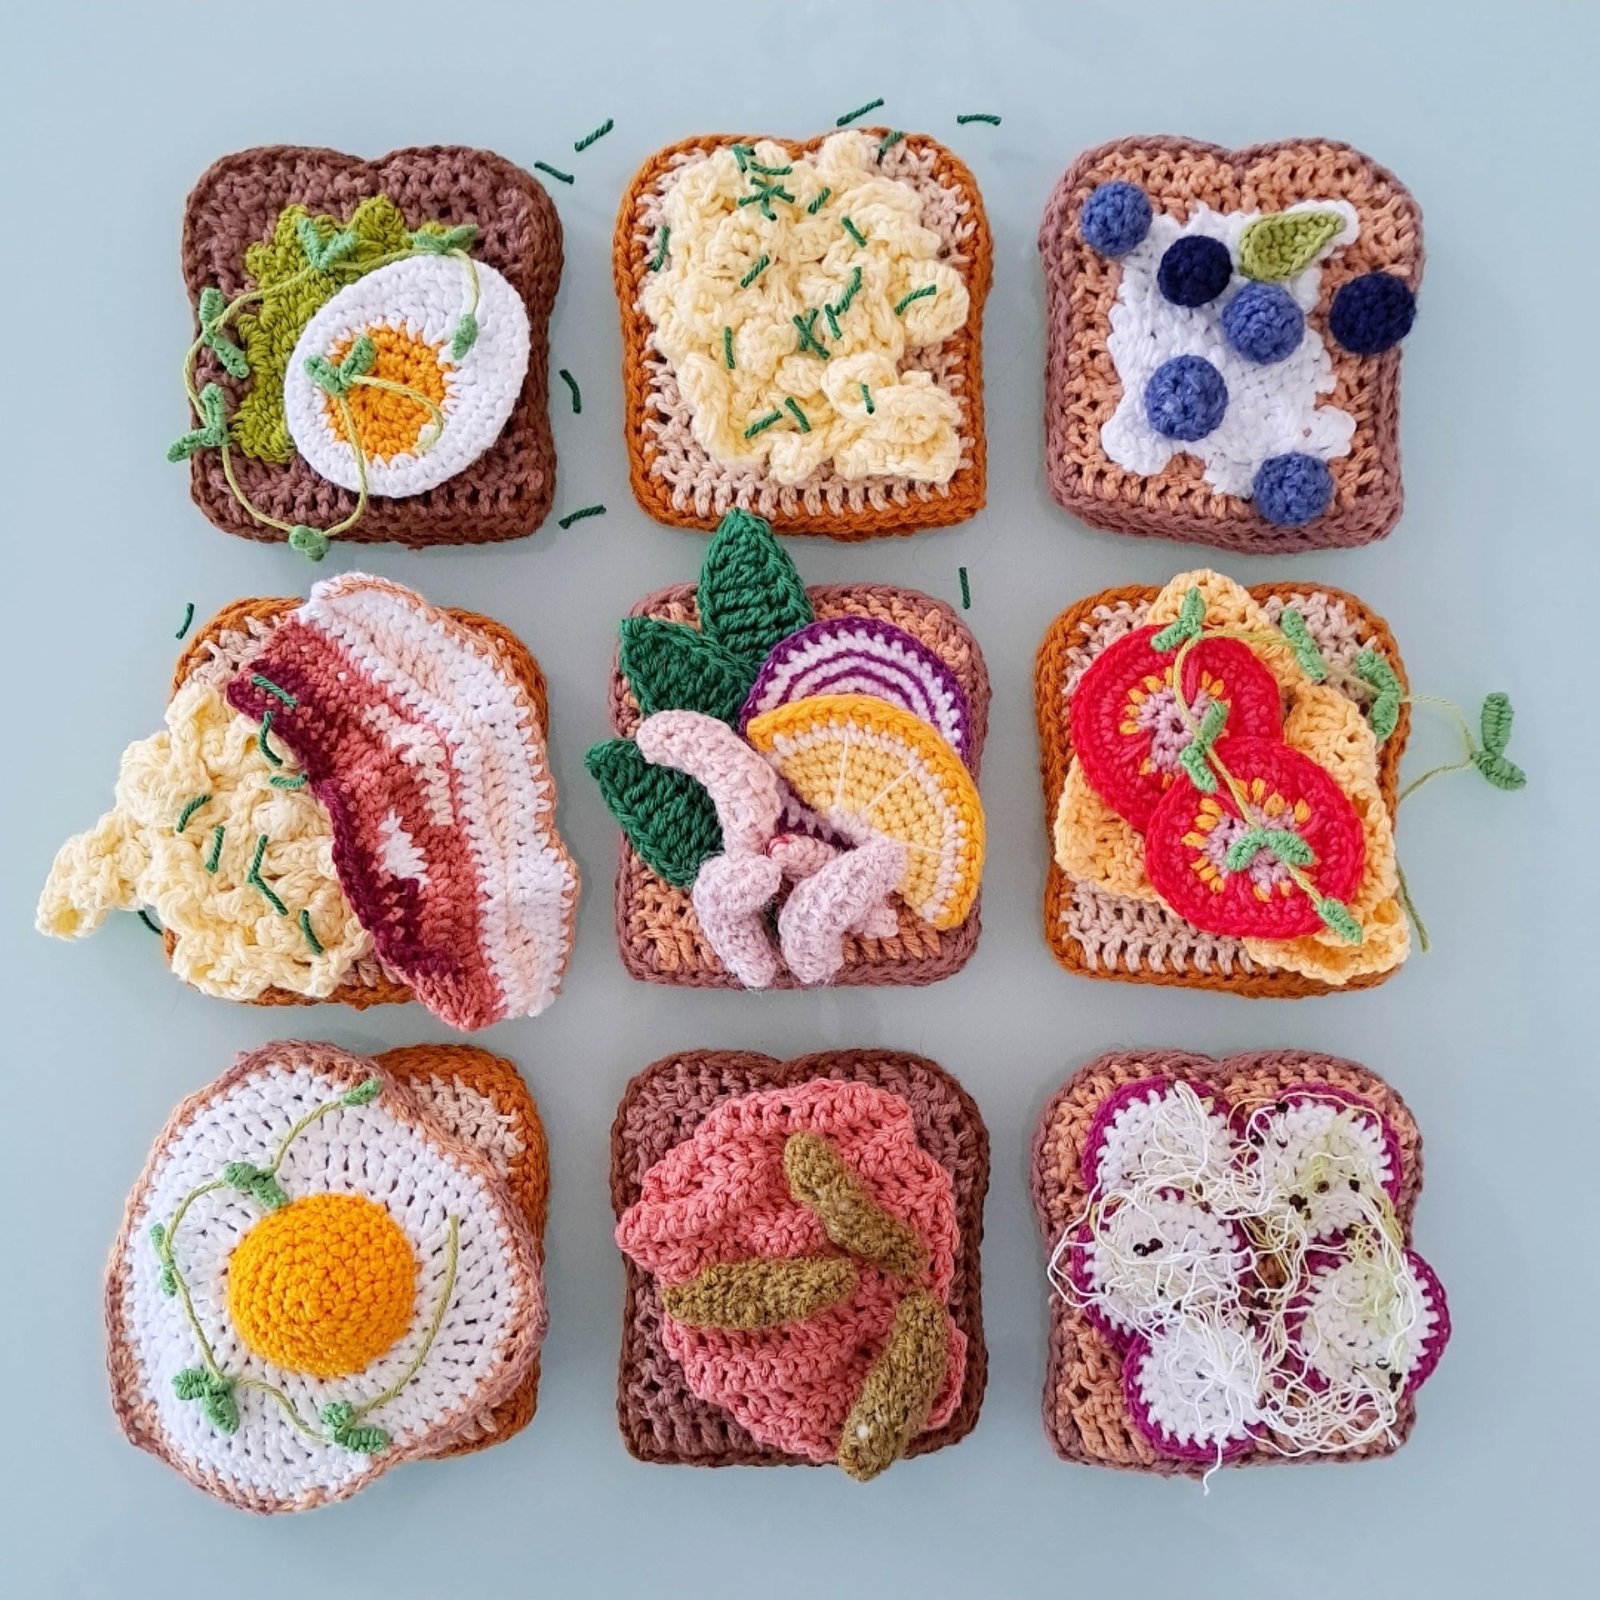 Crocheted Food - a variety of 9 crocheted sandwiches in rows of 3. From let to right, boiled egg slice, scrambled egg, berries and cream cheese, bacon and eggs, and I'm not entirely sure about the rest except the bottom left has a sunny side up egg.